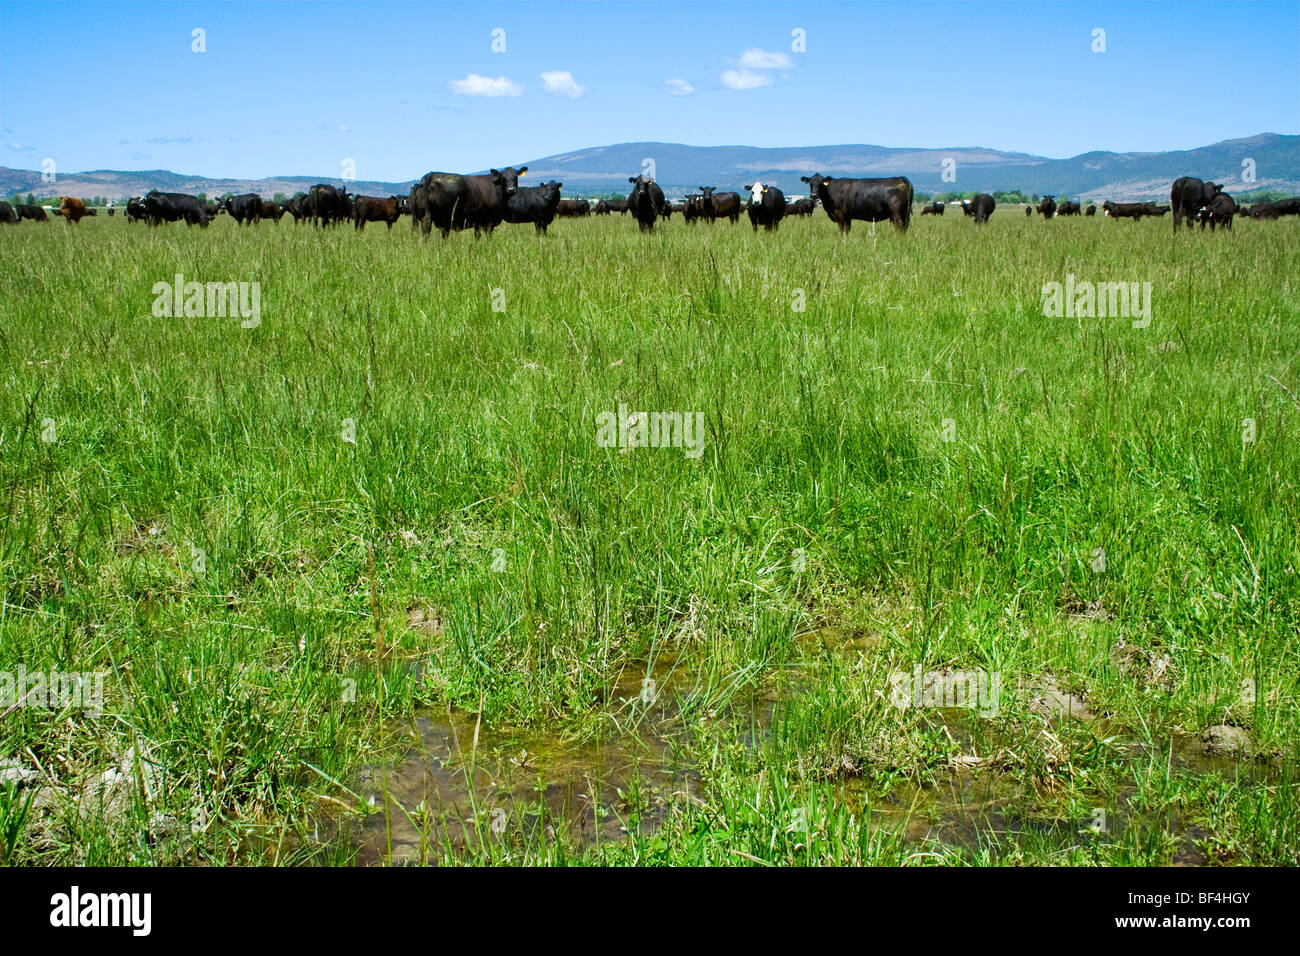 Livestock - Herd of Black Angus beef cattle on a green pasture / Northern California, USA. Stock Photo